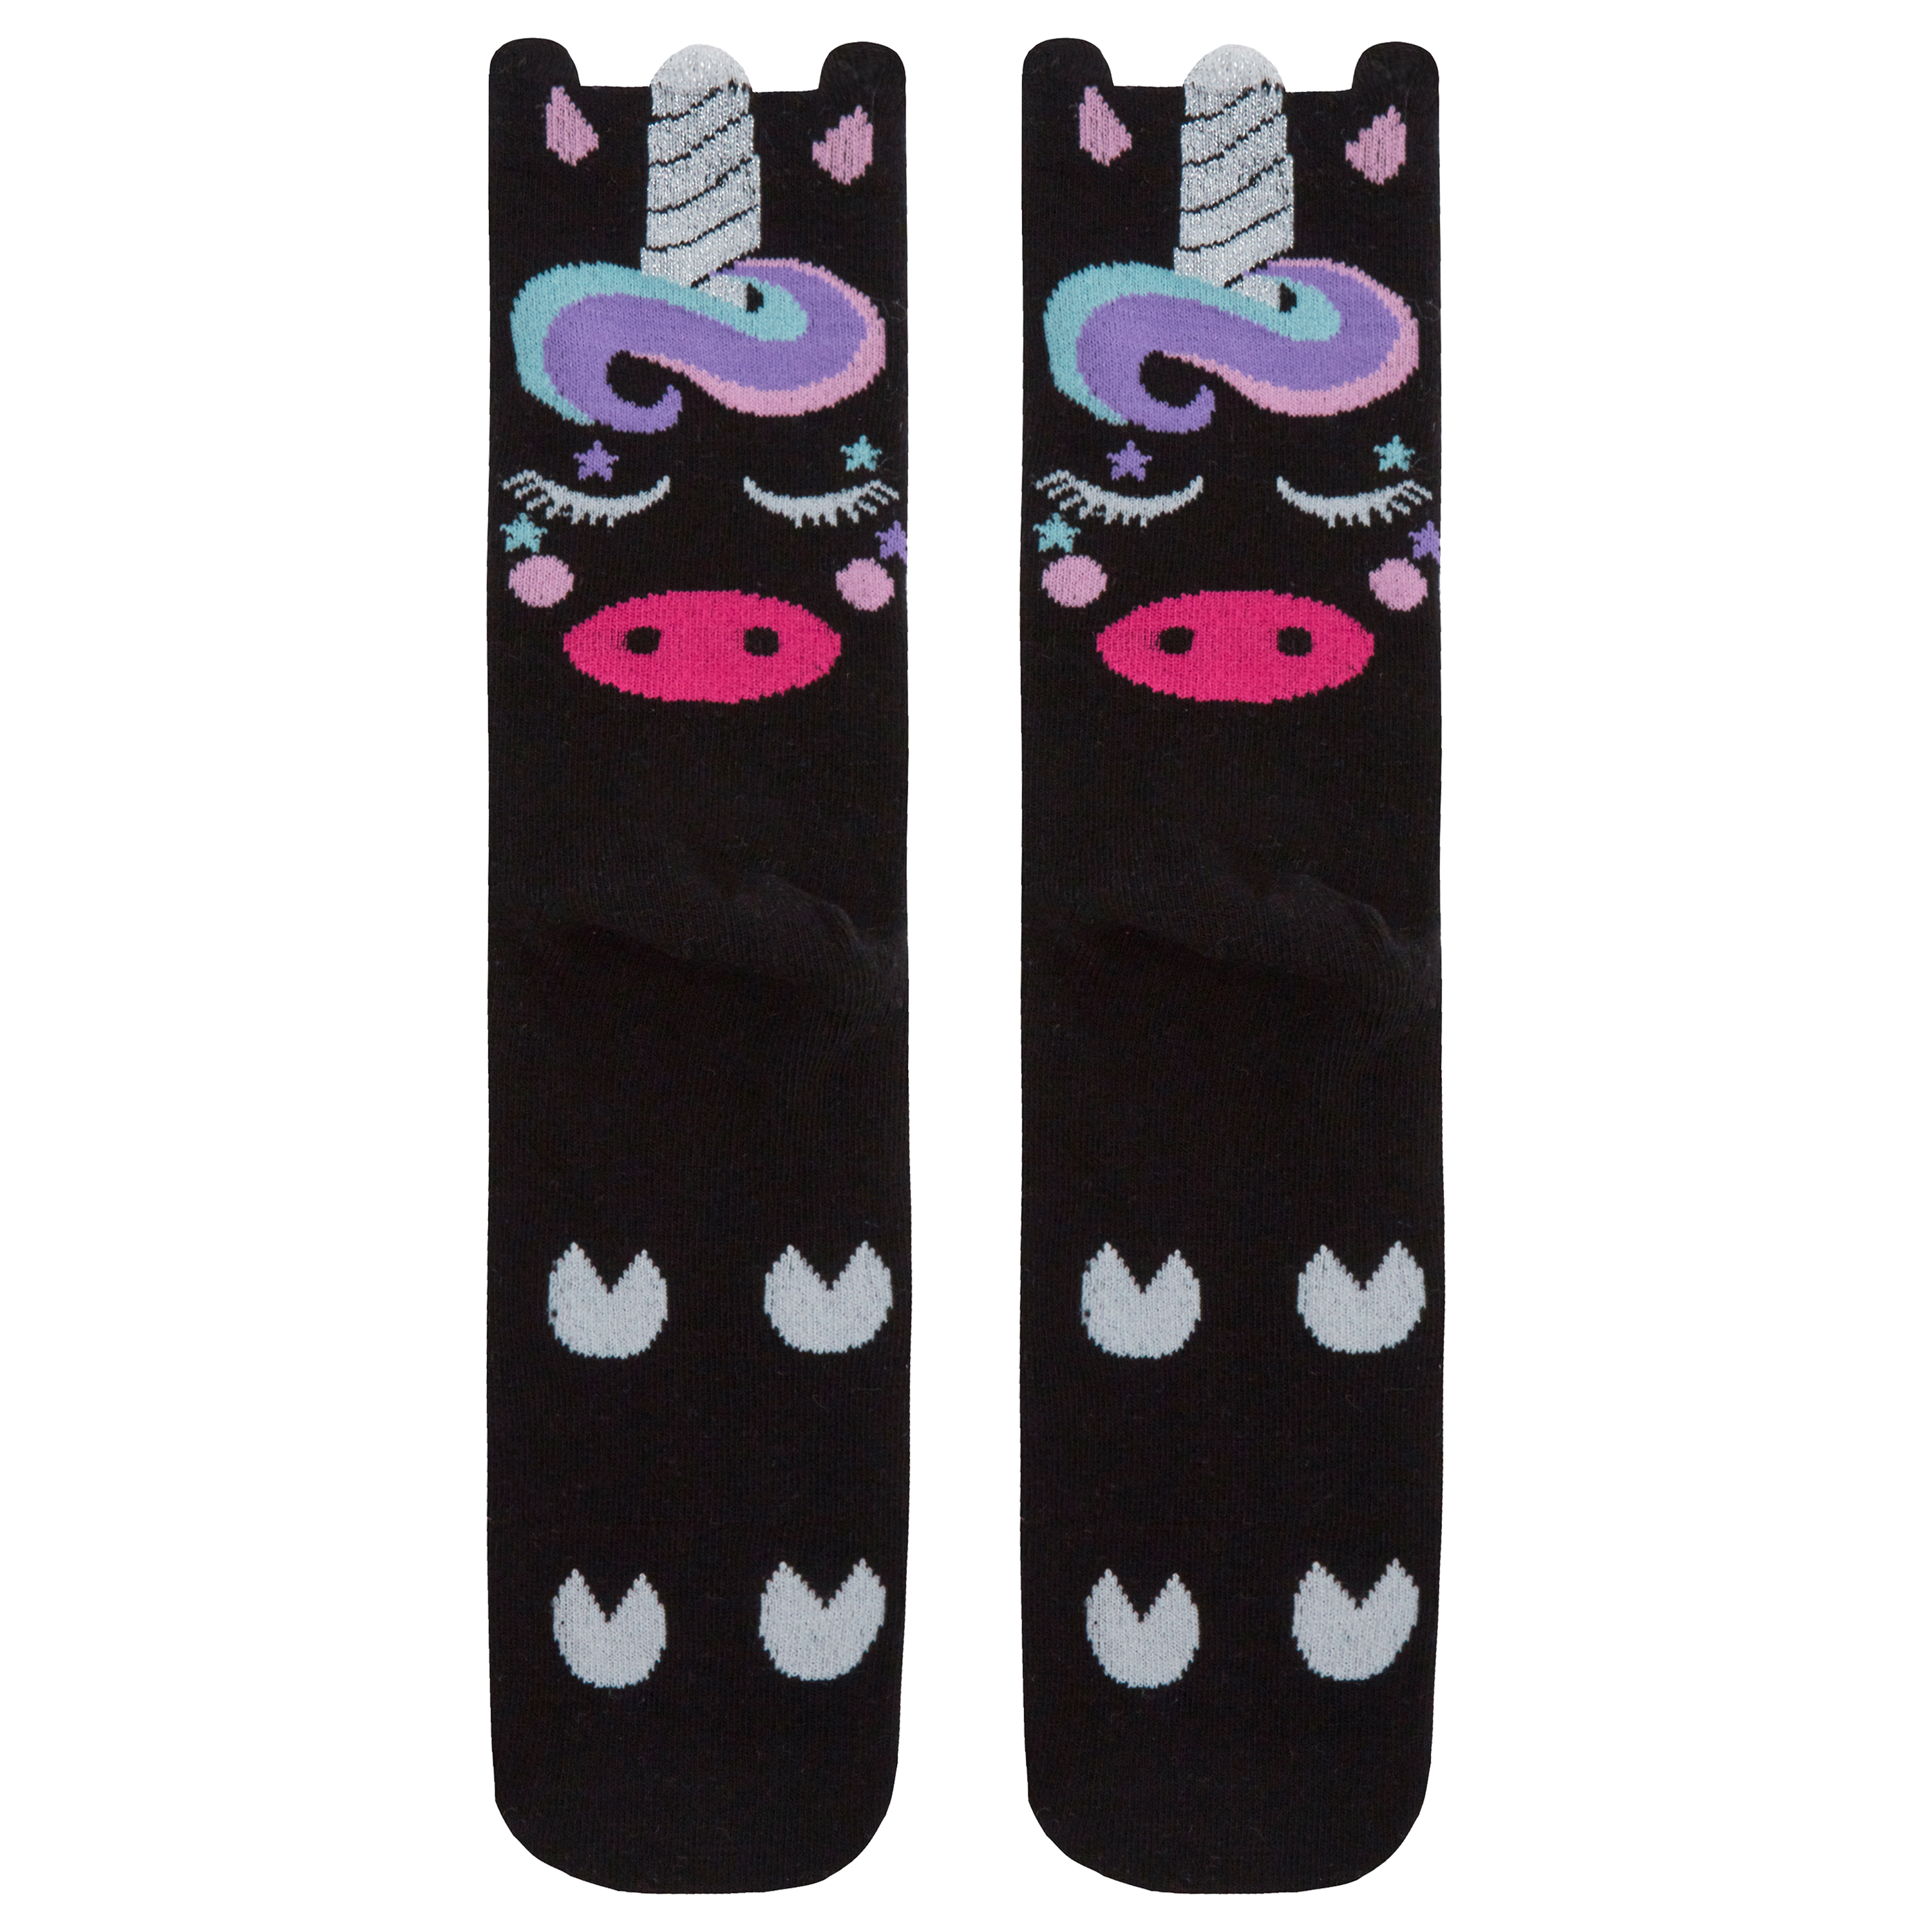 Details about   Ladies Animals Cute Funny Dog Cat Unicorn Odd Cool Socks Novelty Cotton Rich 4-8 